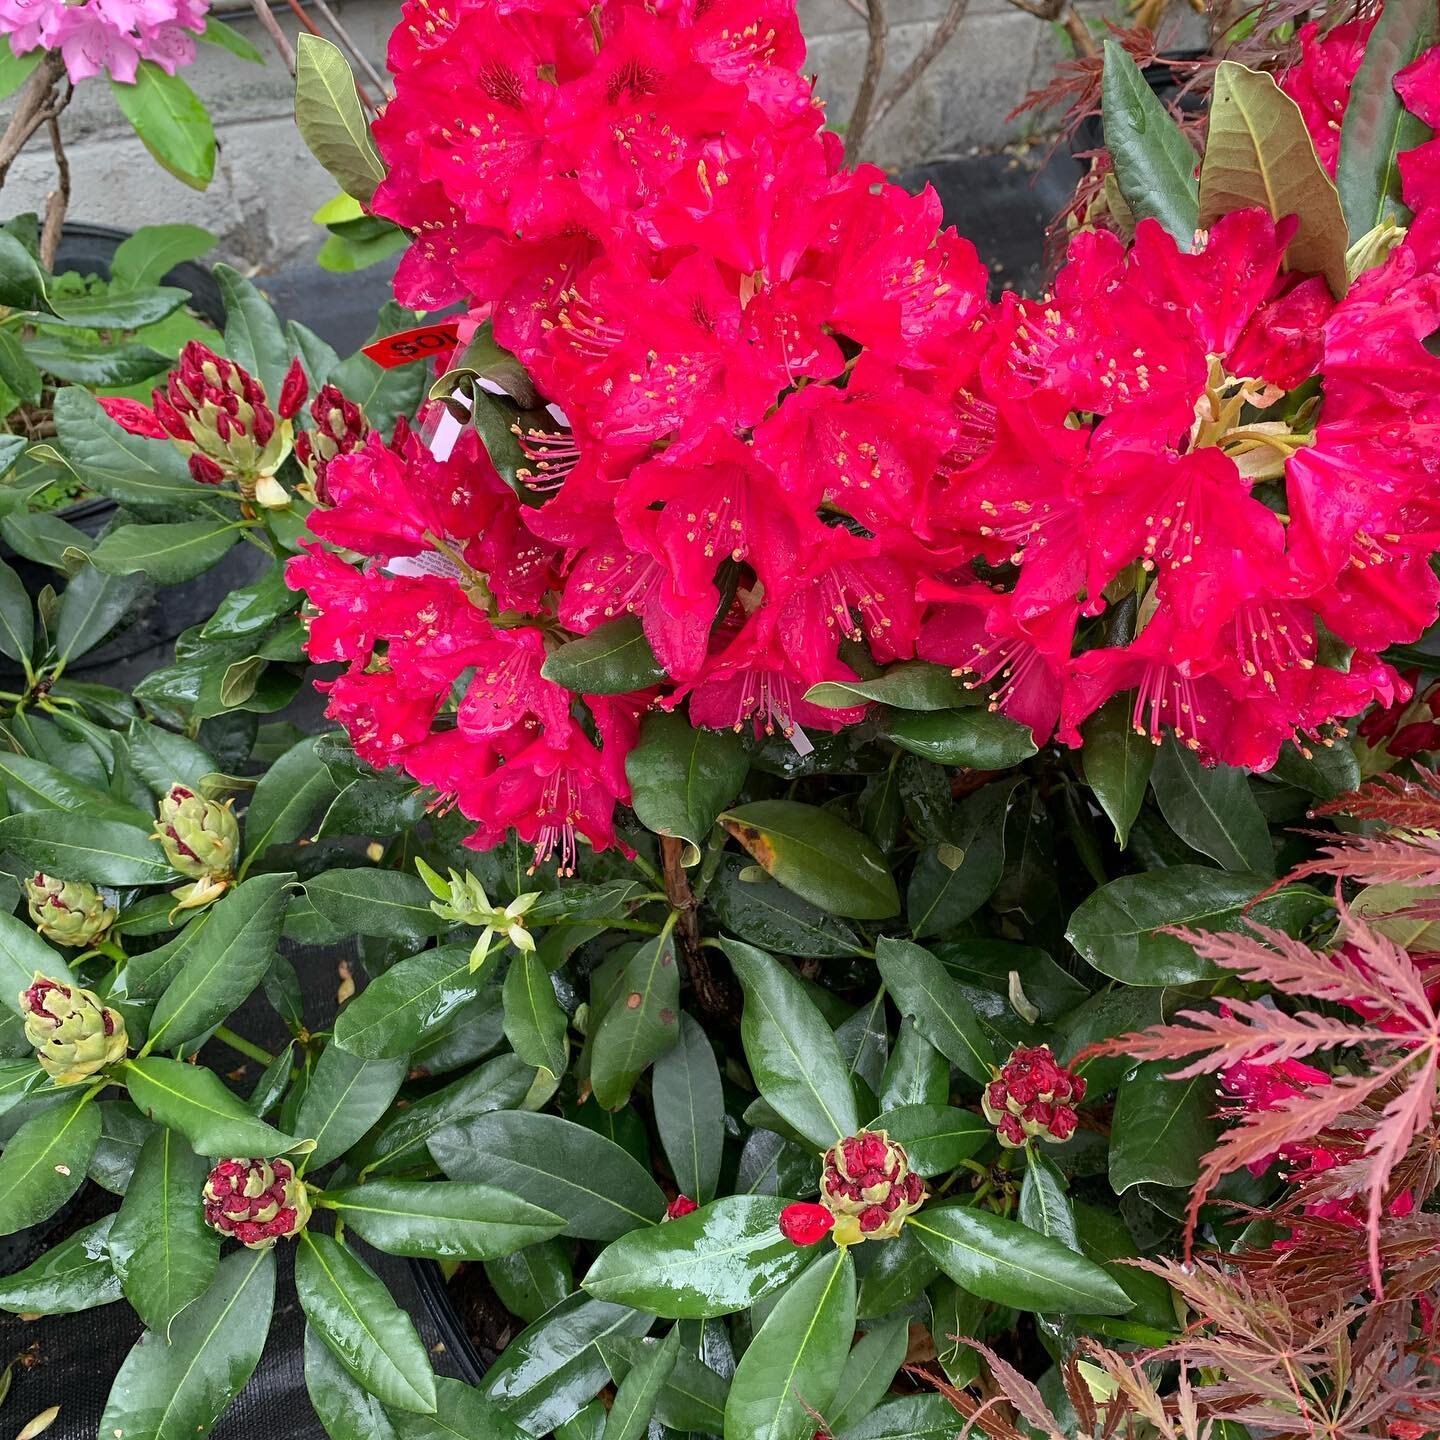 The rhododendrons are ✨popping✨